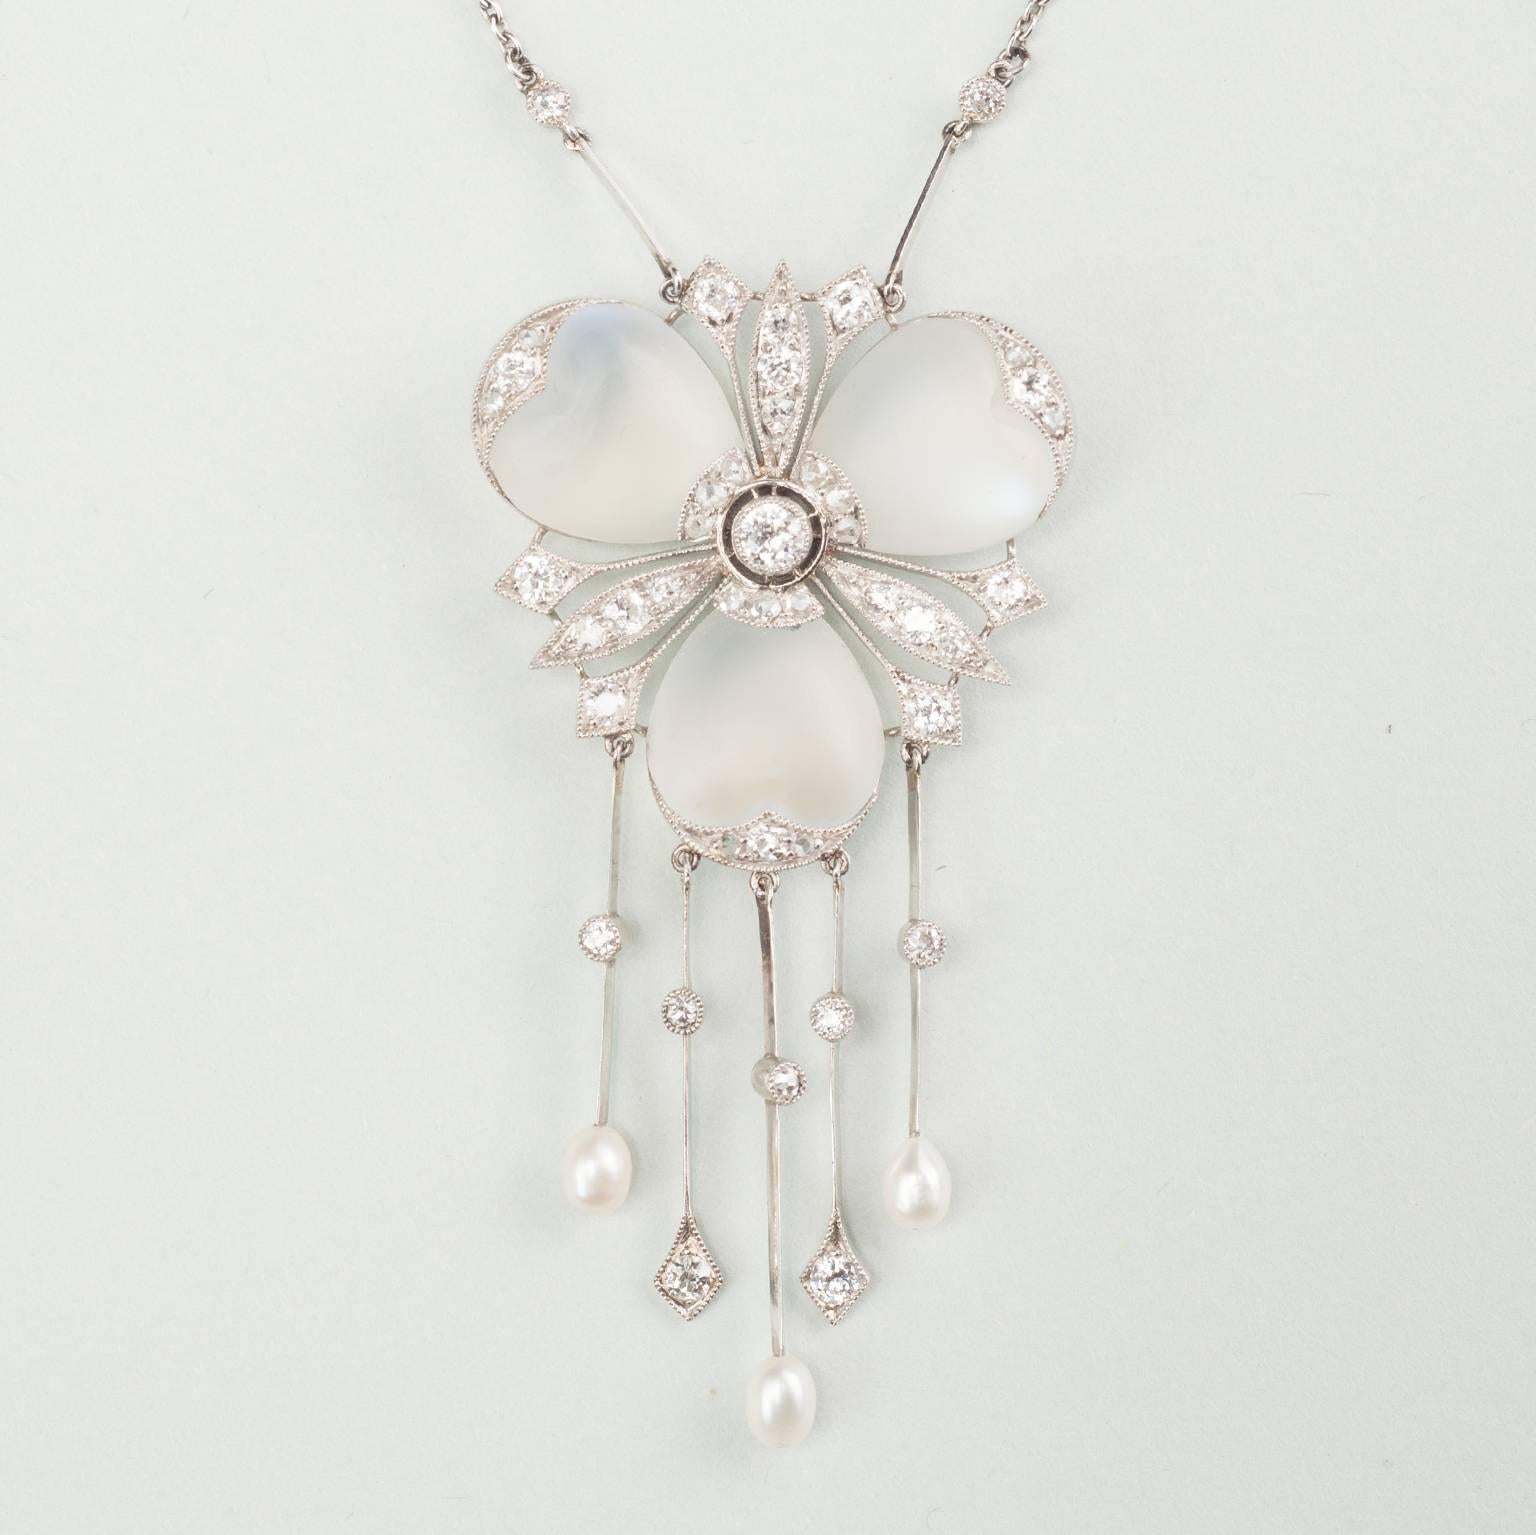 A fairy-like and delicate platinum pendant in the shape of a flower set with three heart shaped cabochon cut moonstone petals and brilliant cut diamonds at the end of the petals and in between them, under the flower are five drops decorated with